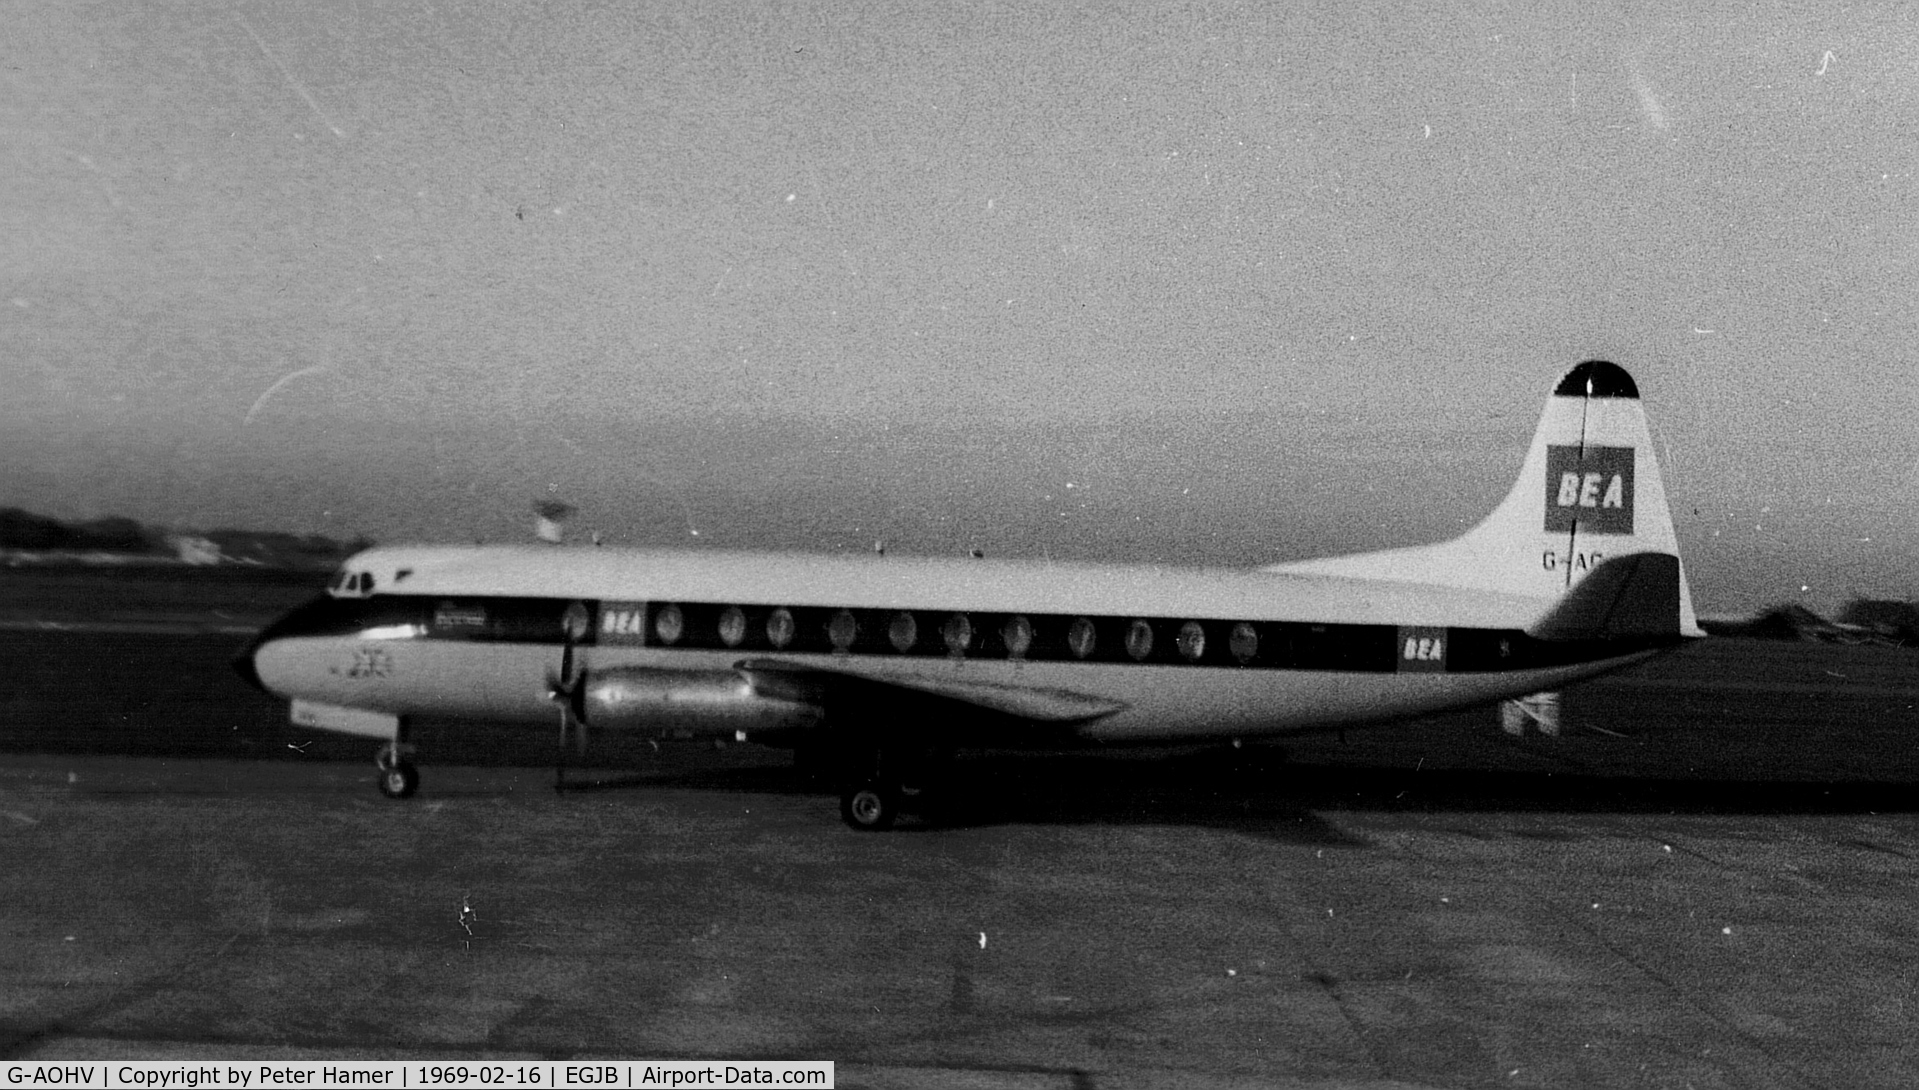 G-AOHV, 1957 Vickers Viscount 802 C/N 170, Guernsey